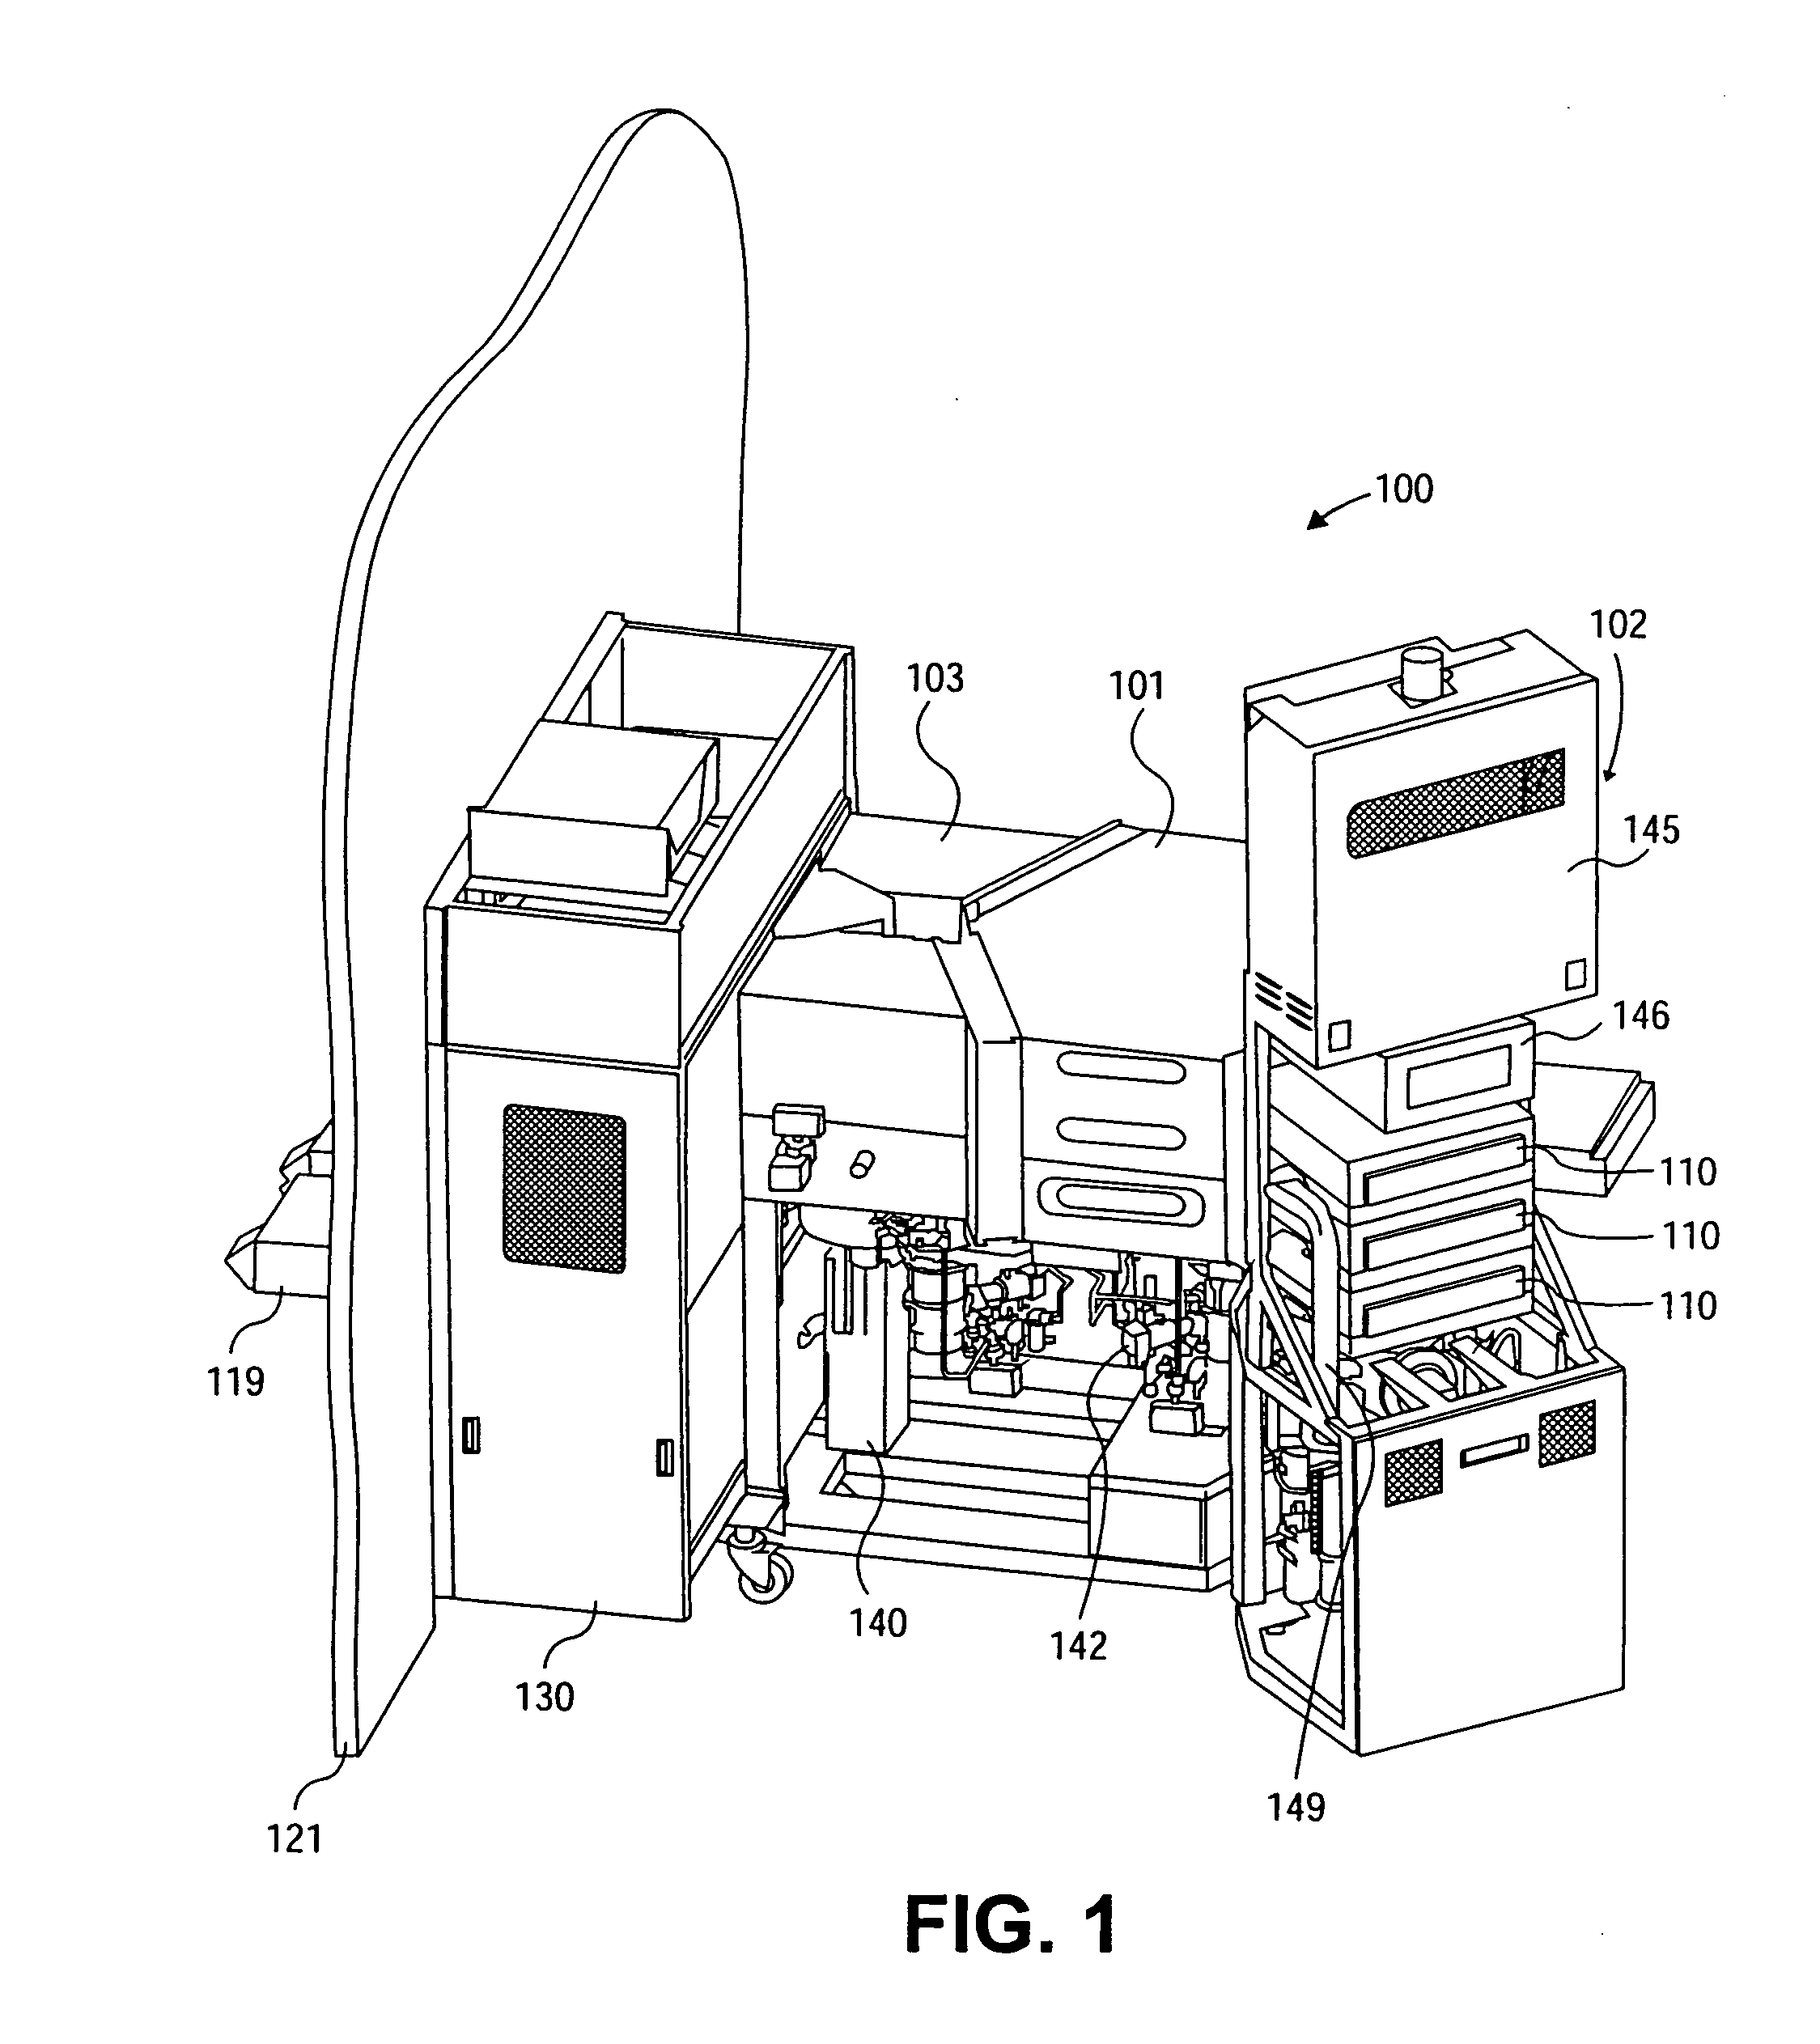 Massively parallel atomic layer deposition/chemical vapor deposition system